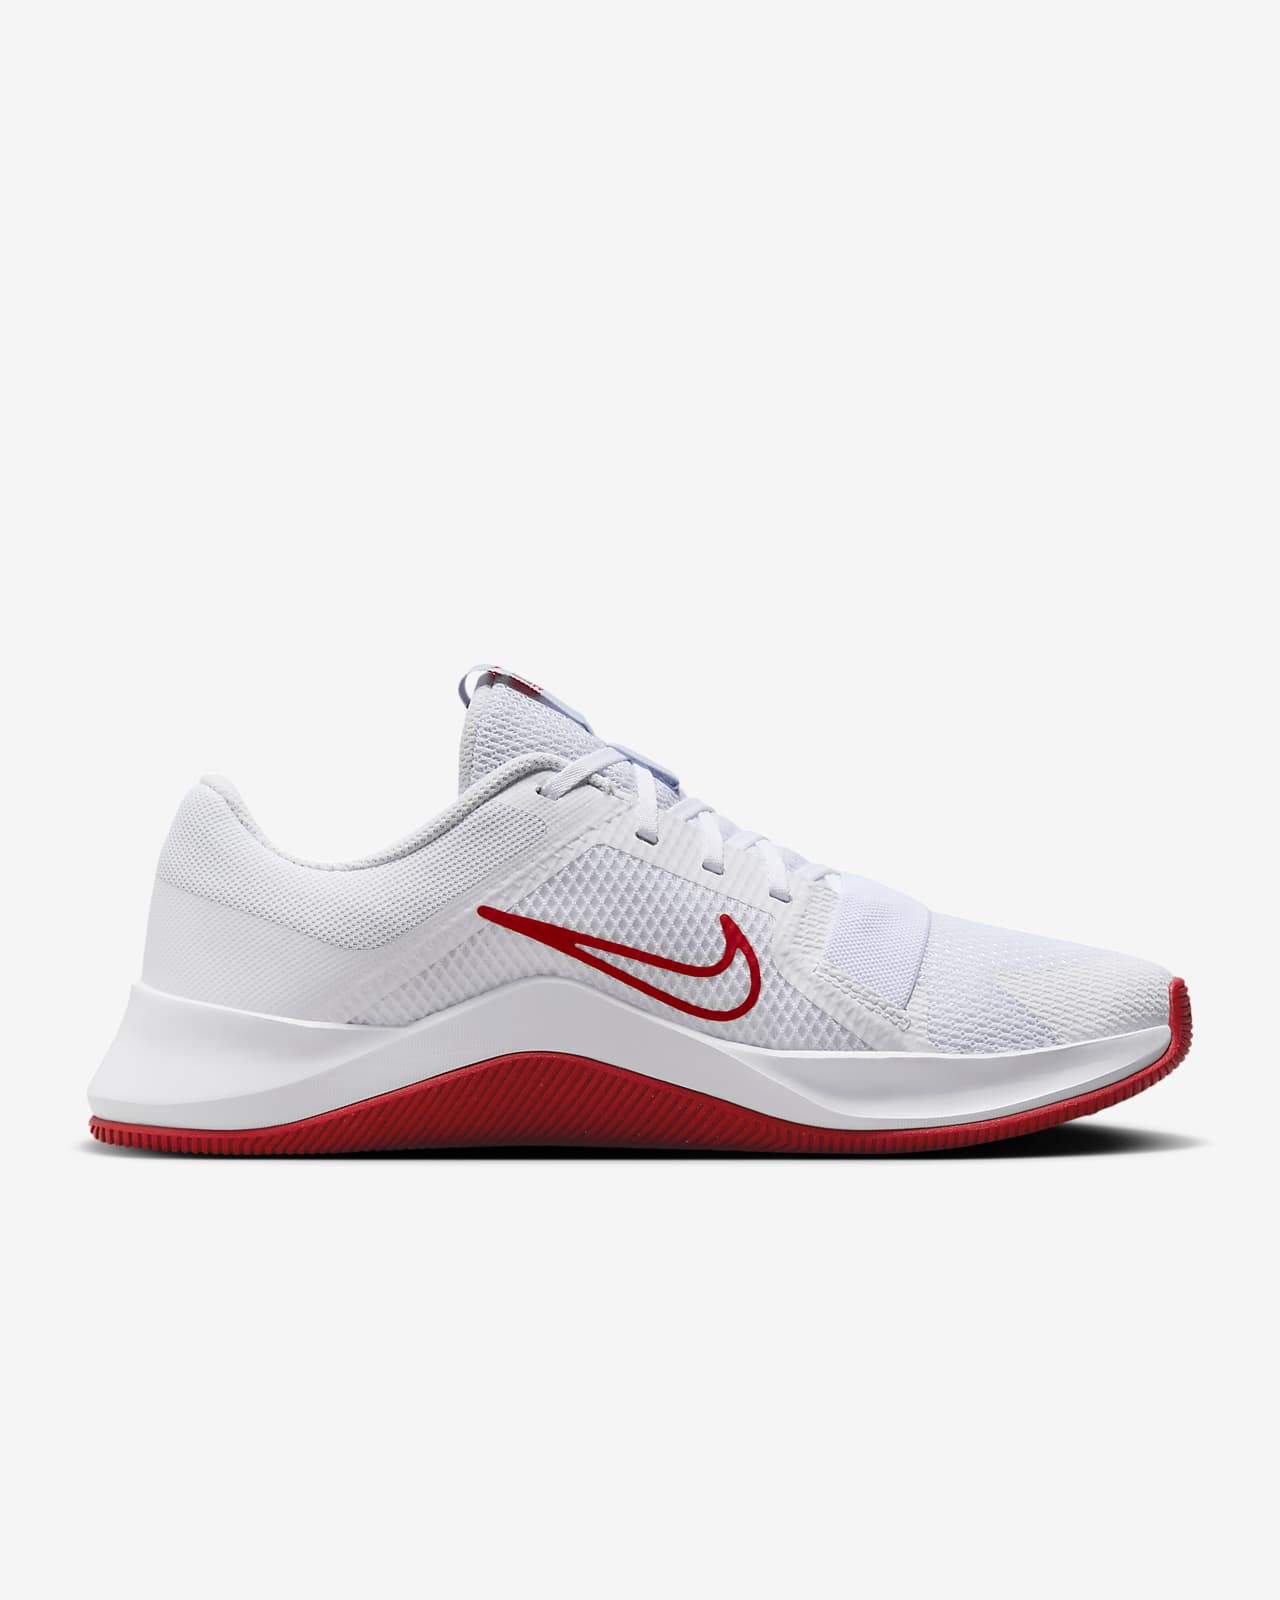 Men's Basketball Shoes & Trainers. Nike ID